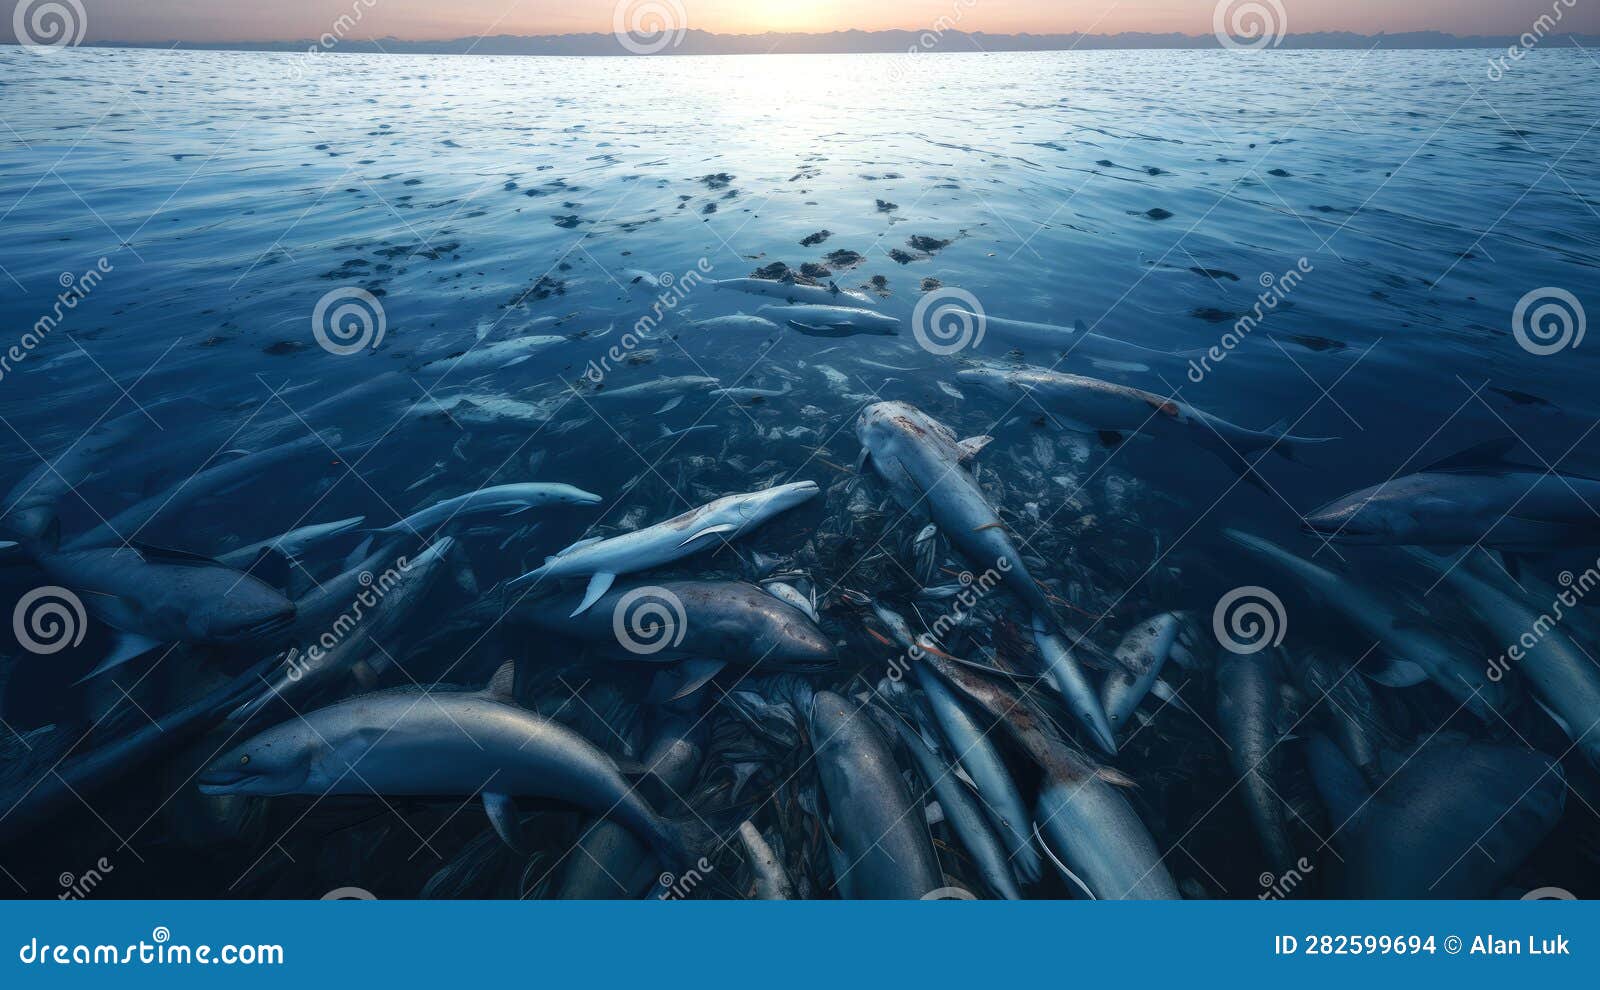 Large Amount of Dead Fish. Radioactive Wastewater Pollute the Ocean ...